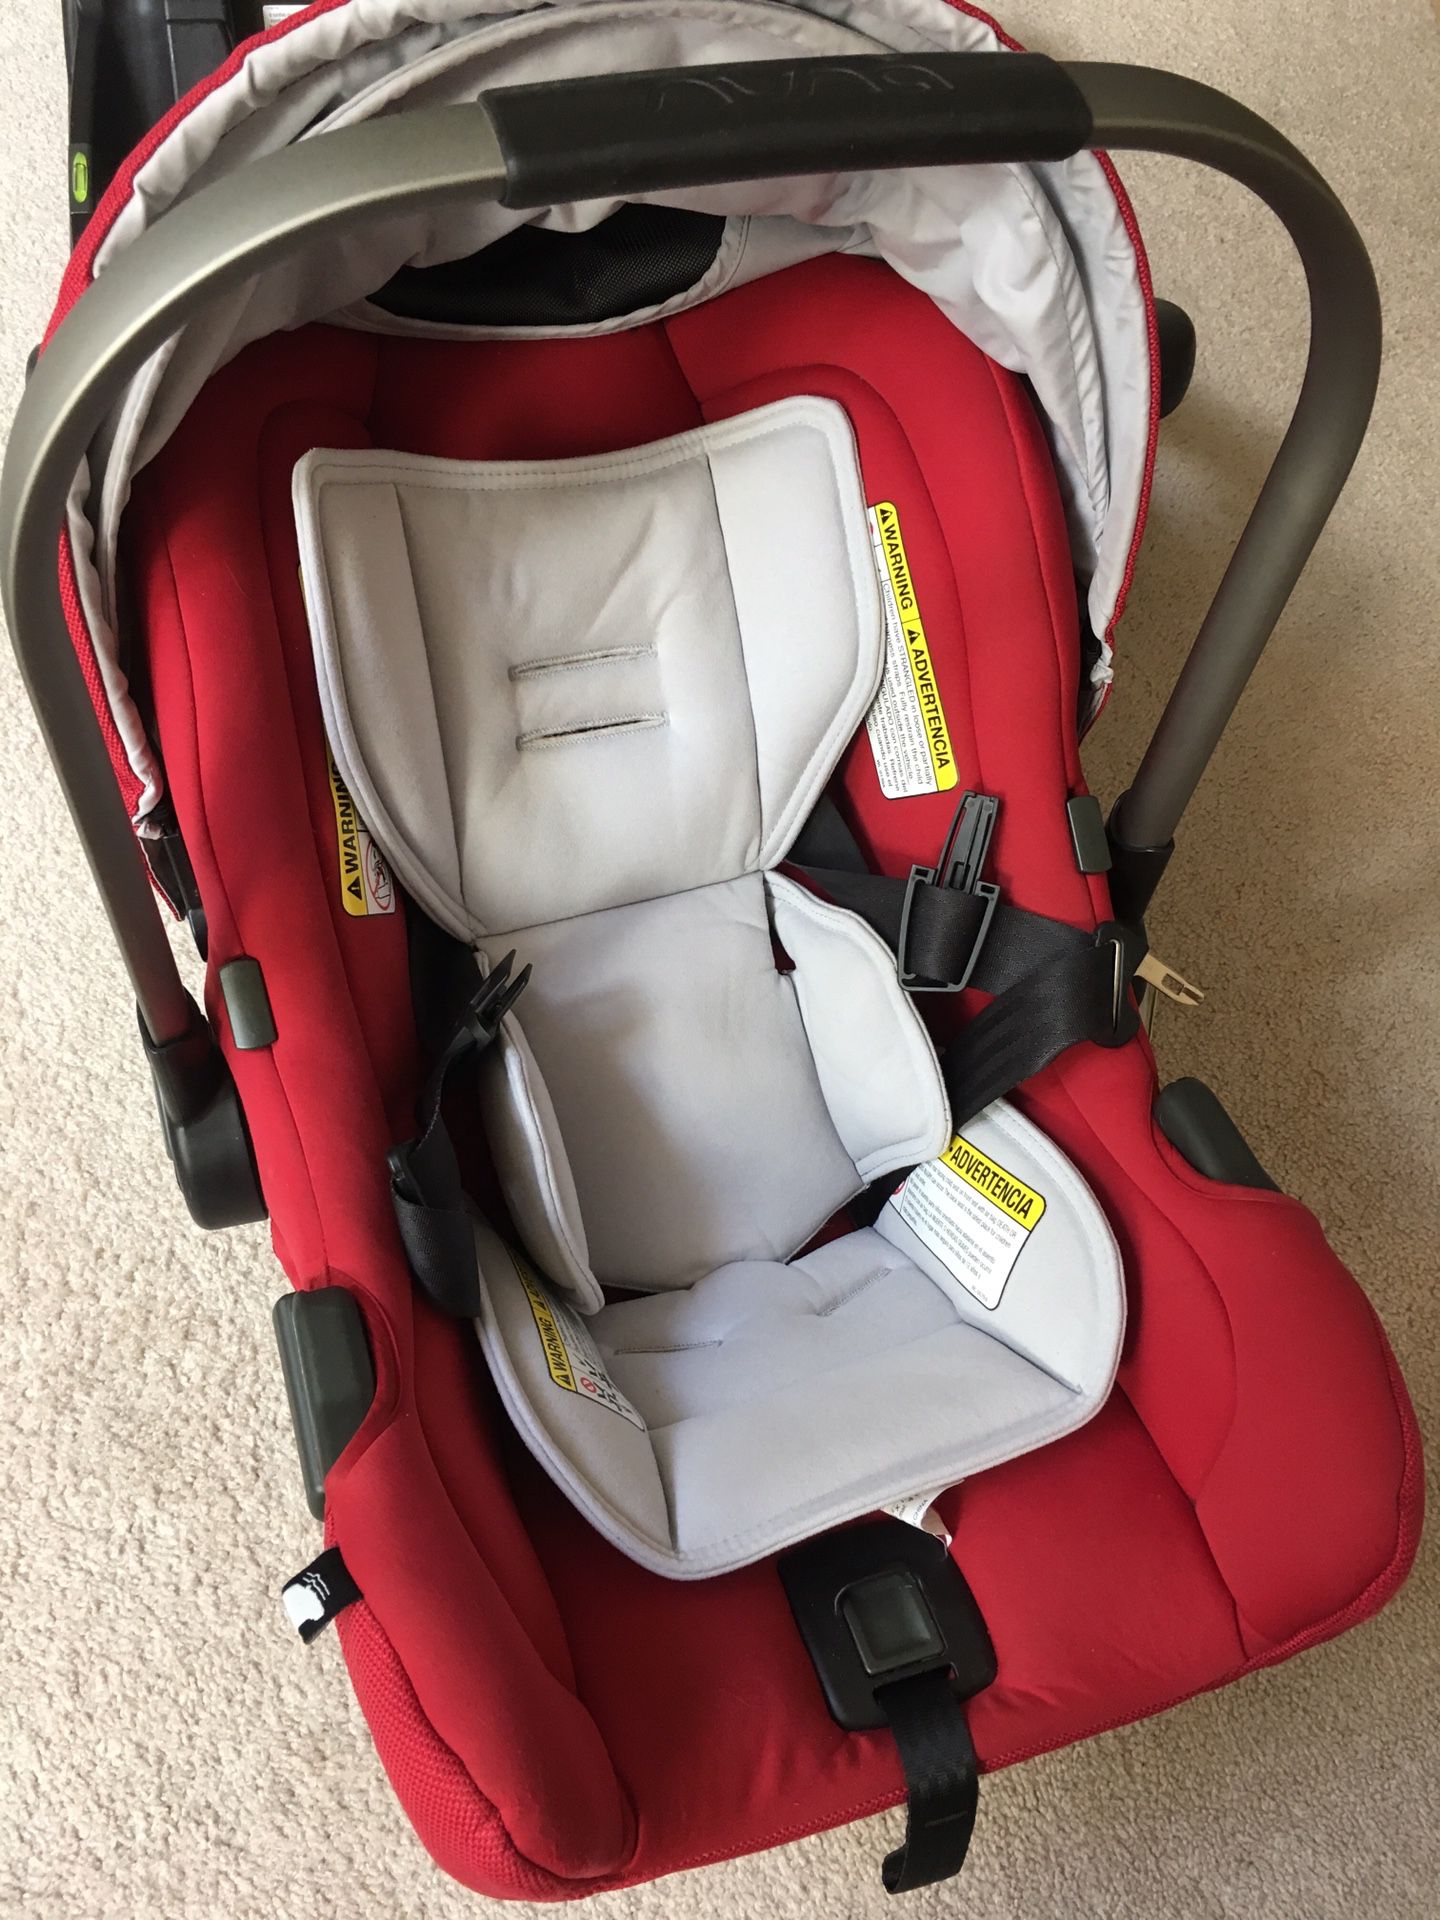 Nuna car seat plus two bases - in good condition!